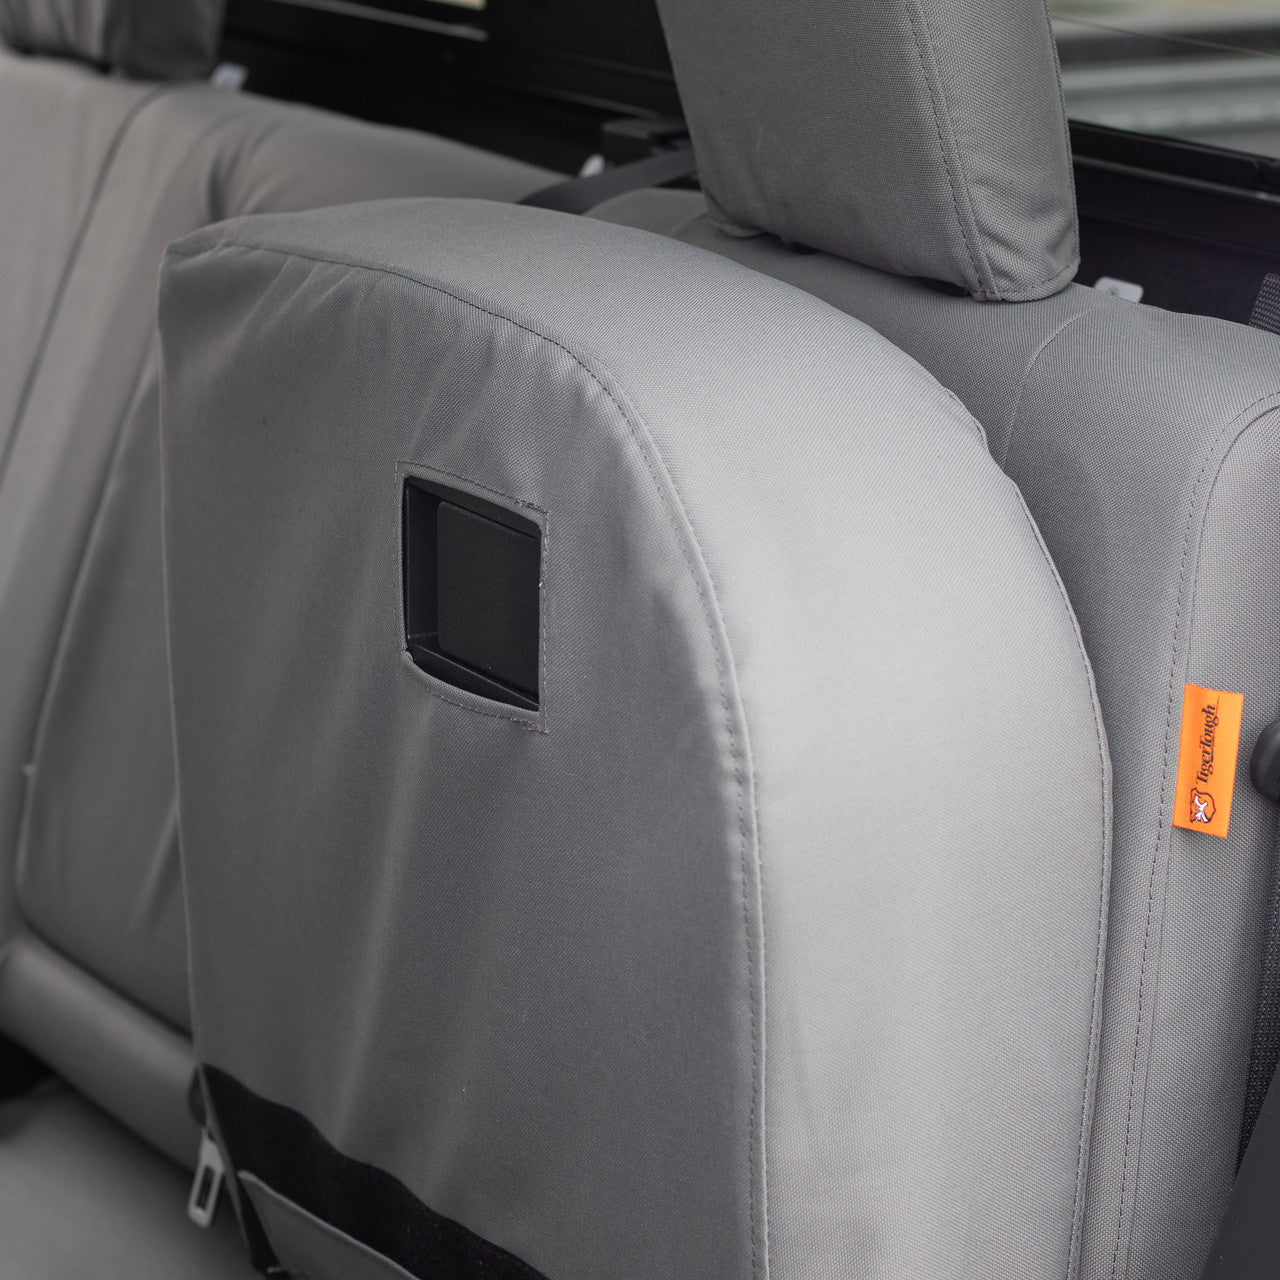 TigerTough Rear Seat Covers for Nissan Titan: Made in the USA with a 2-year warranty.